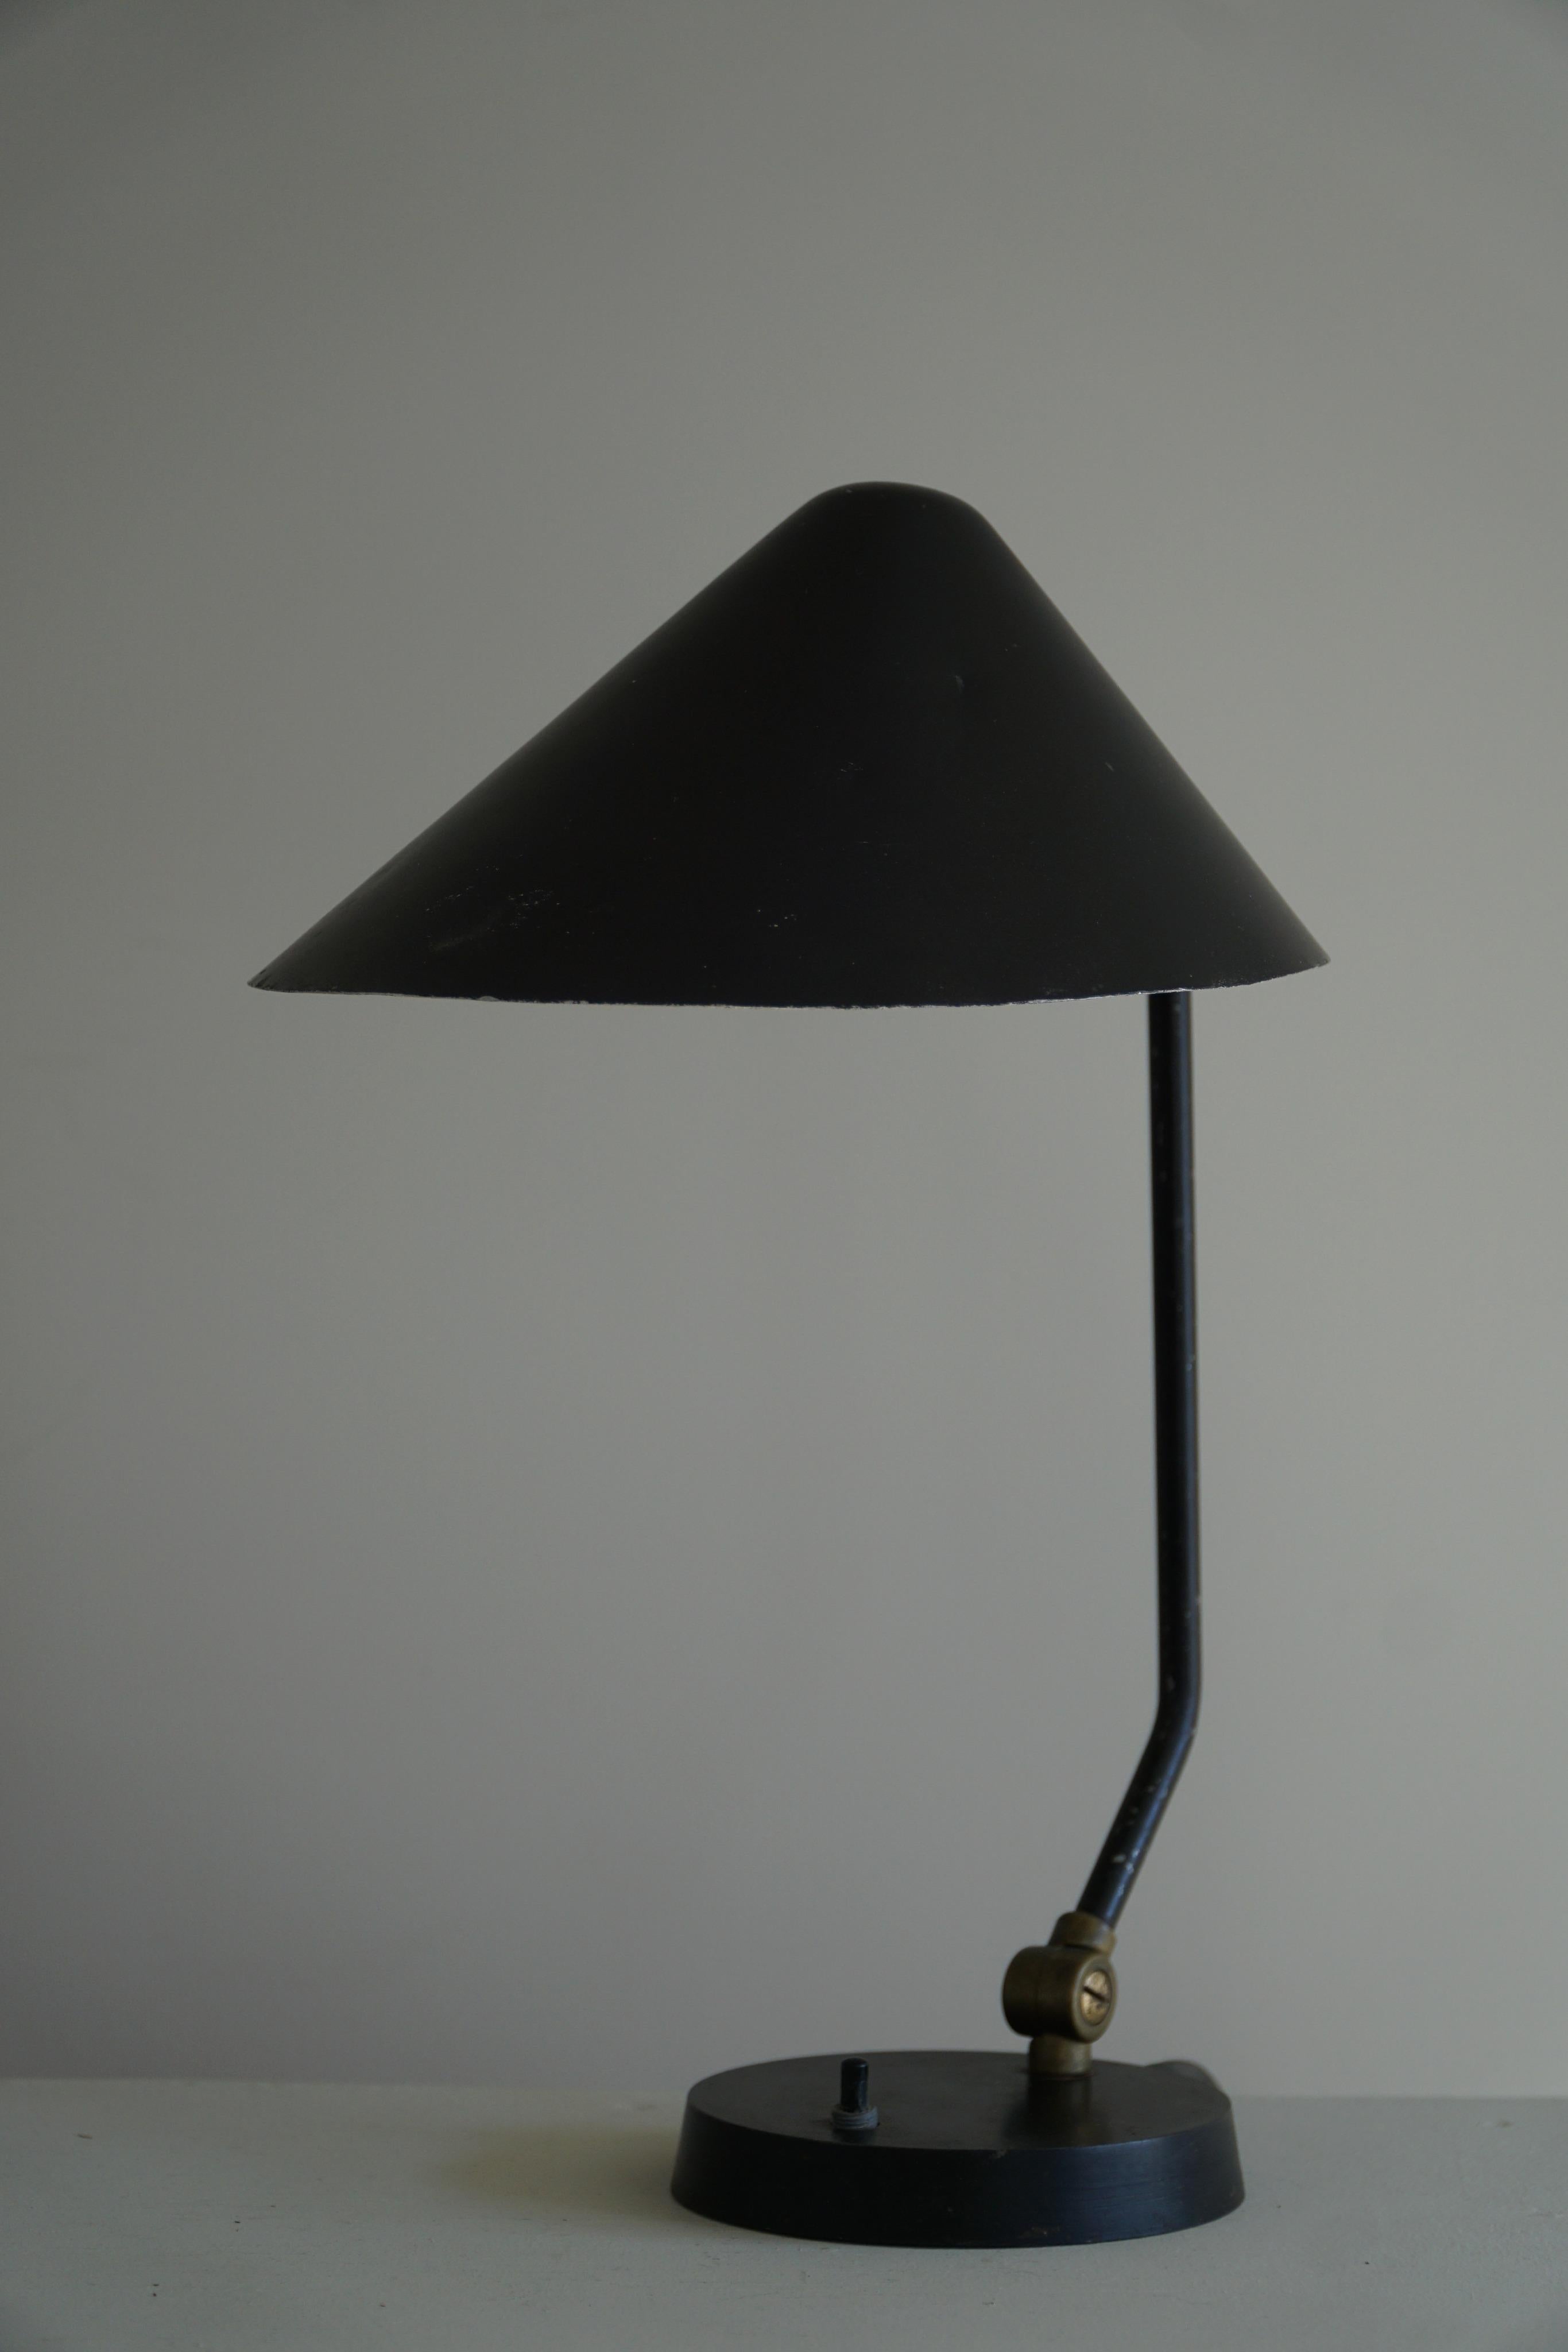 Danish Modern Adjustable Table Lamp in Metal, Made by Louis Poulsen, 1950s For Sale 4